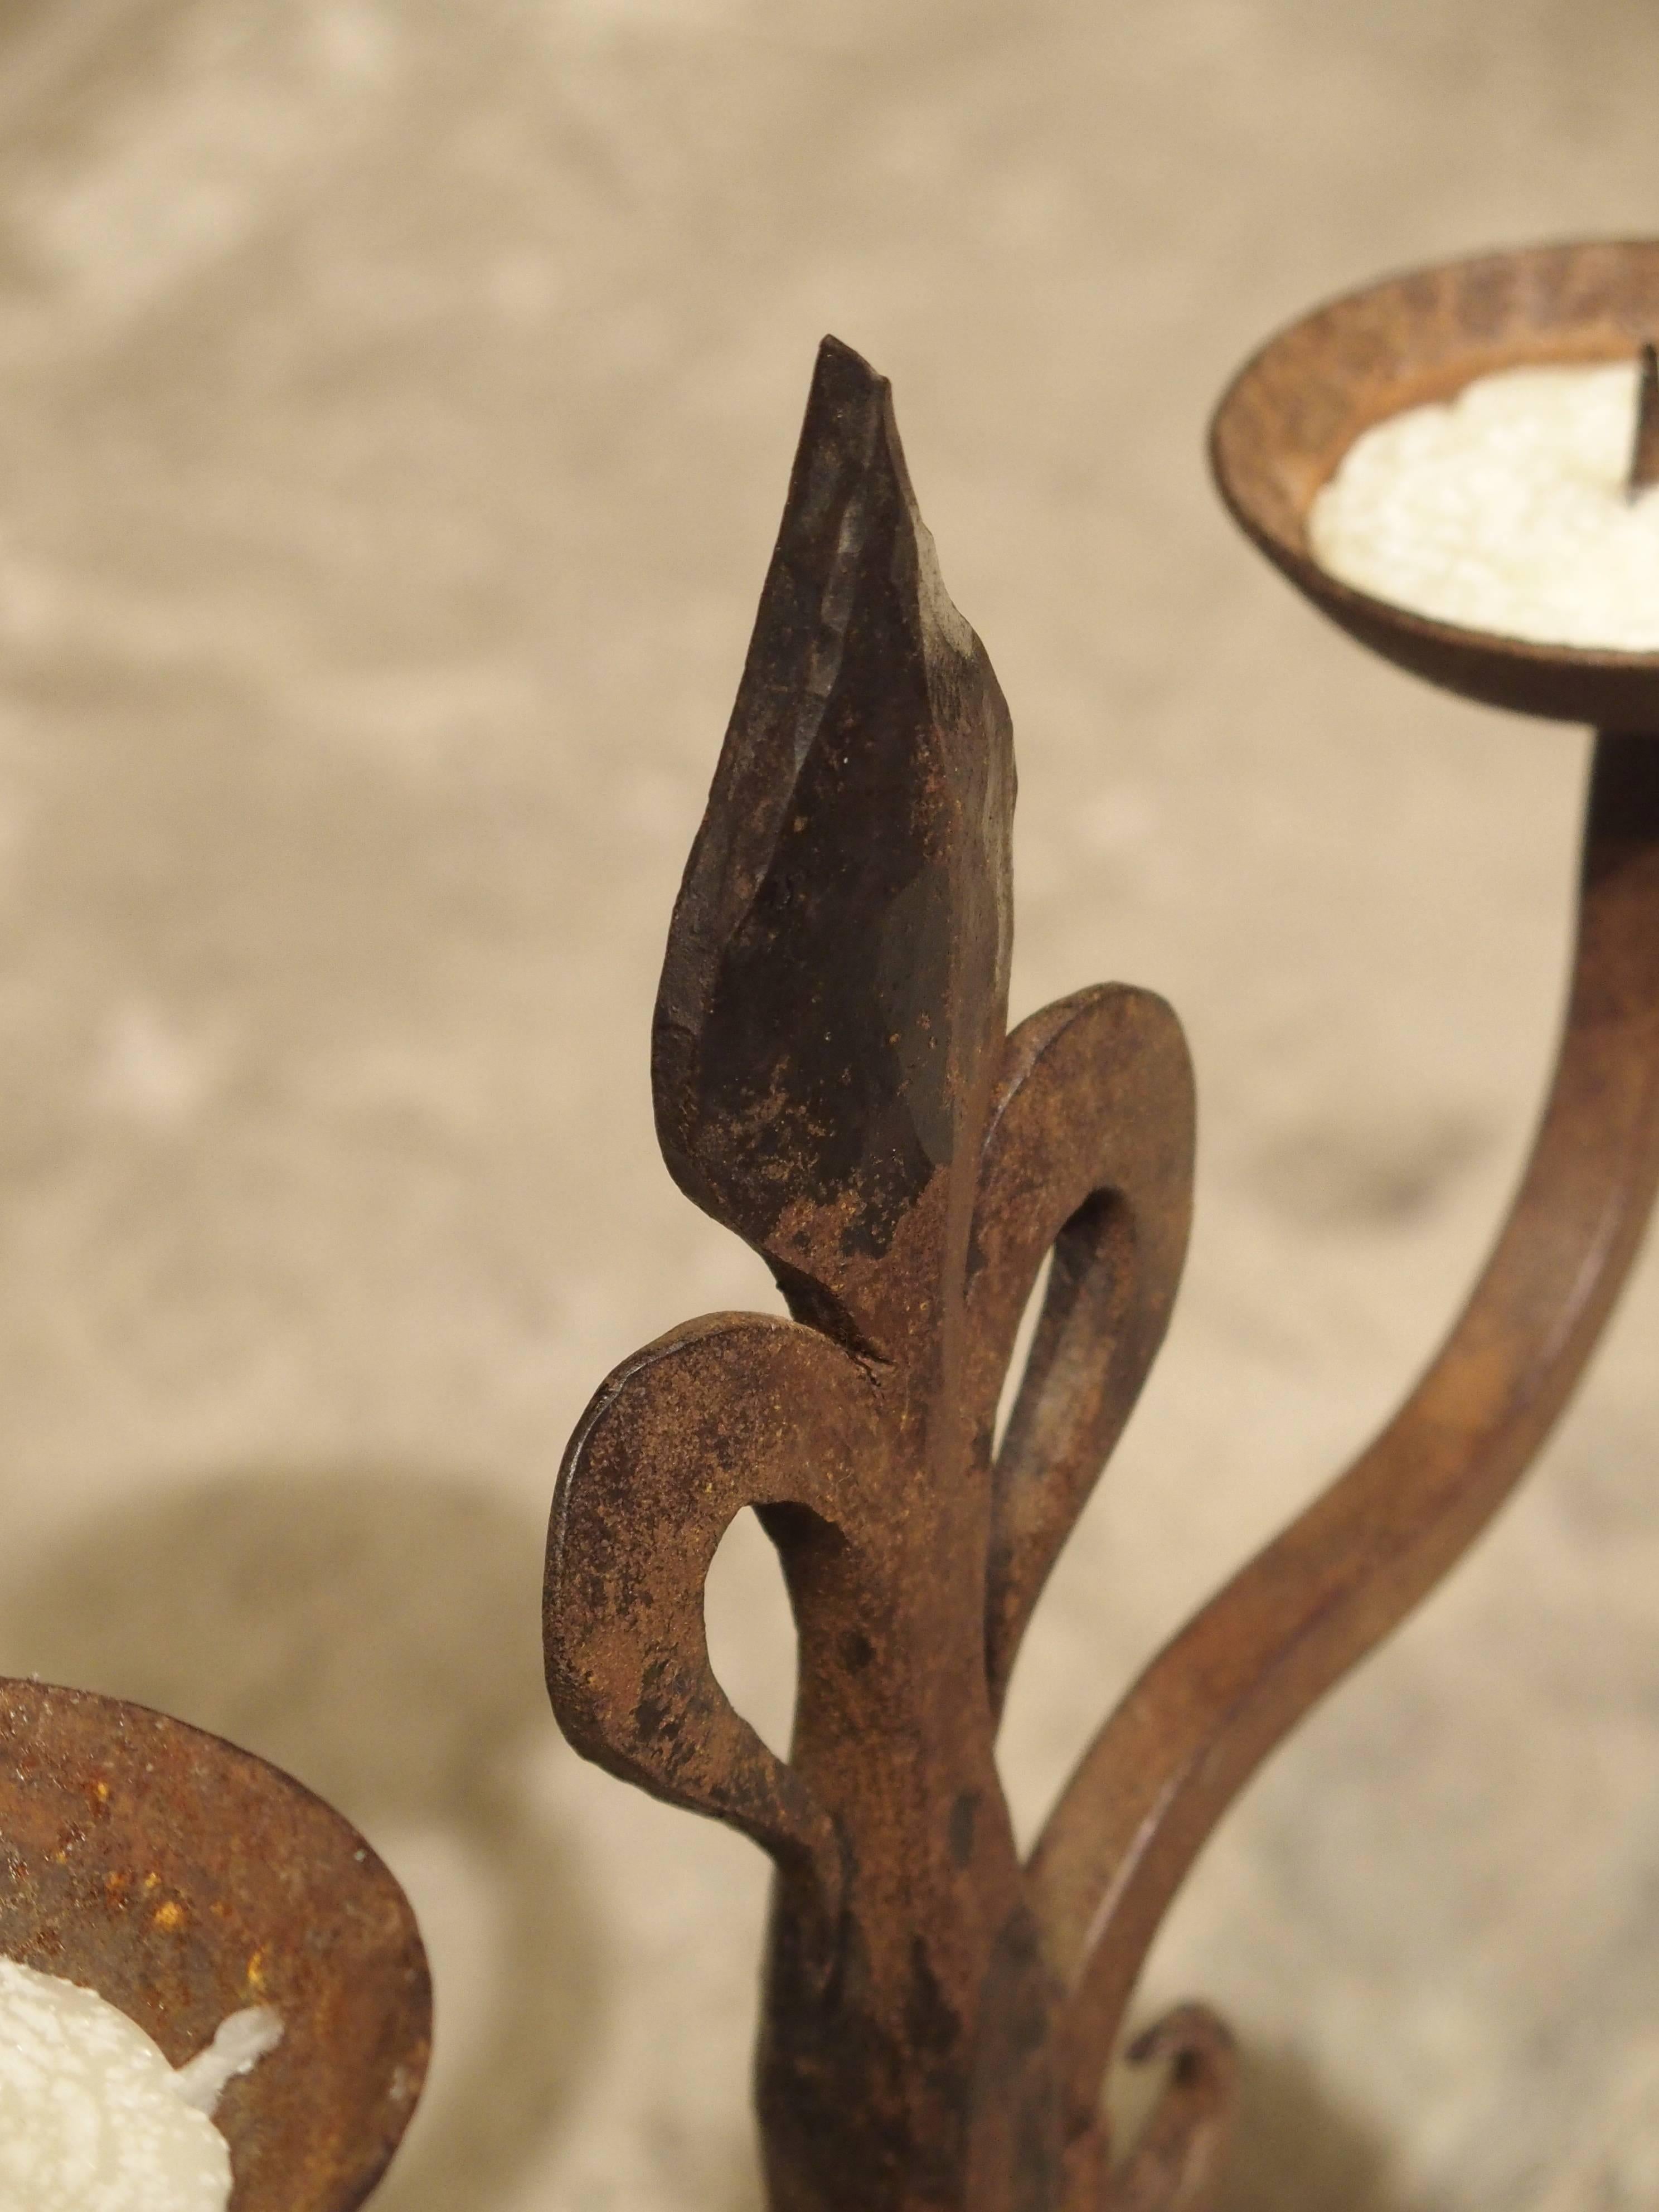 These two-arm French candelabras are hand-forged and hammered. There are two S-scroll arms banded to a center post with the Fleur de Lis at the top. This rests upon four legs placed in a rectangular shape. Perfect for any area of the home, these